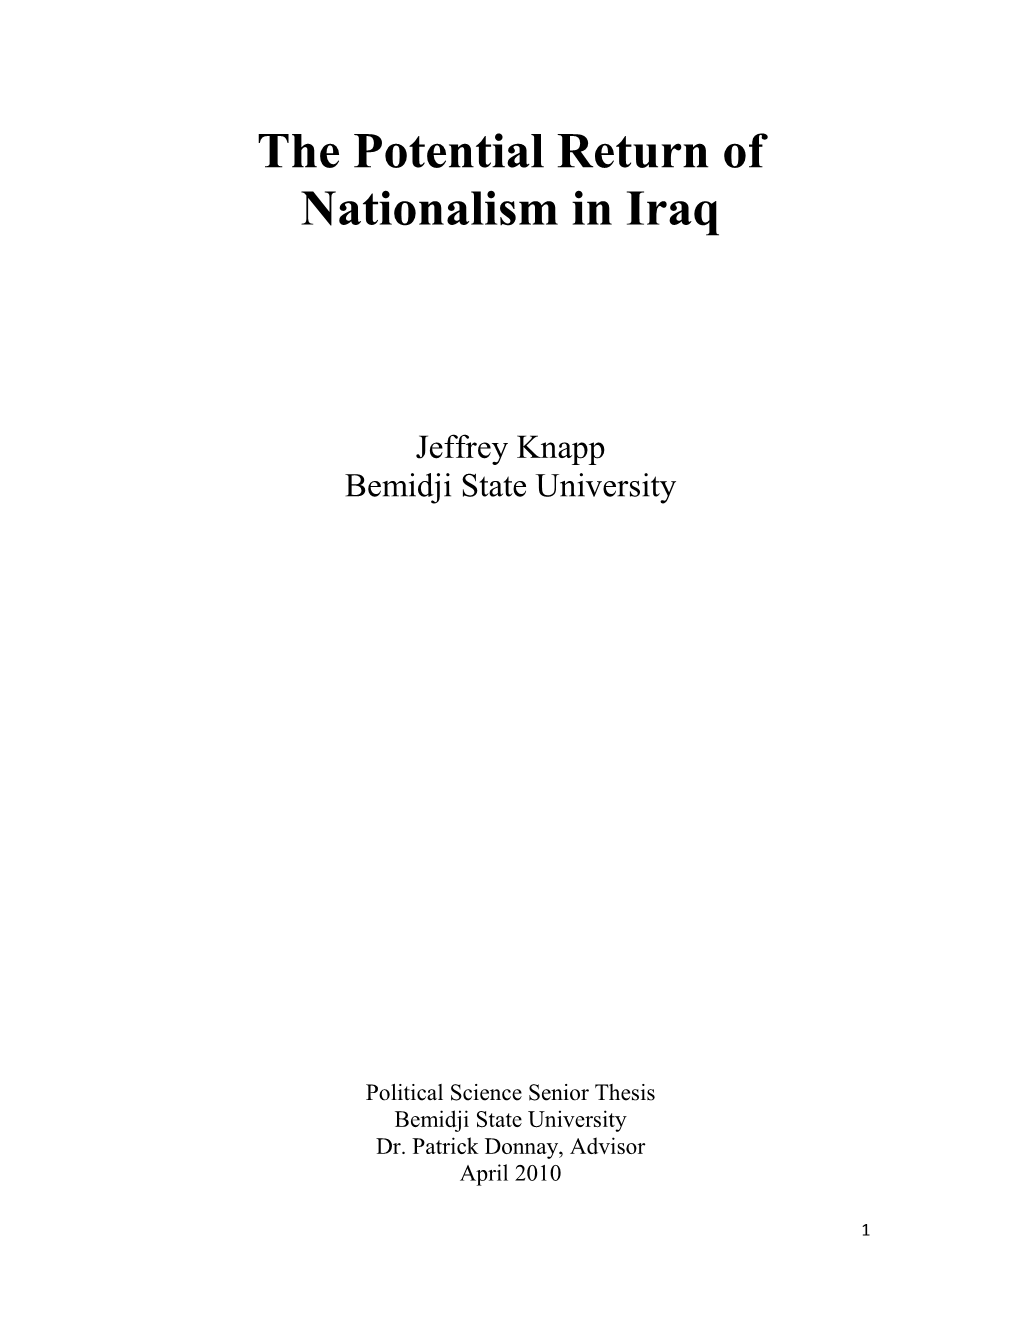 The Potential Return of Nationalism in Iraq